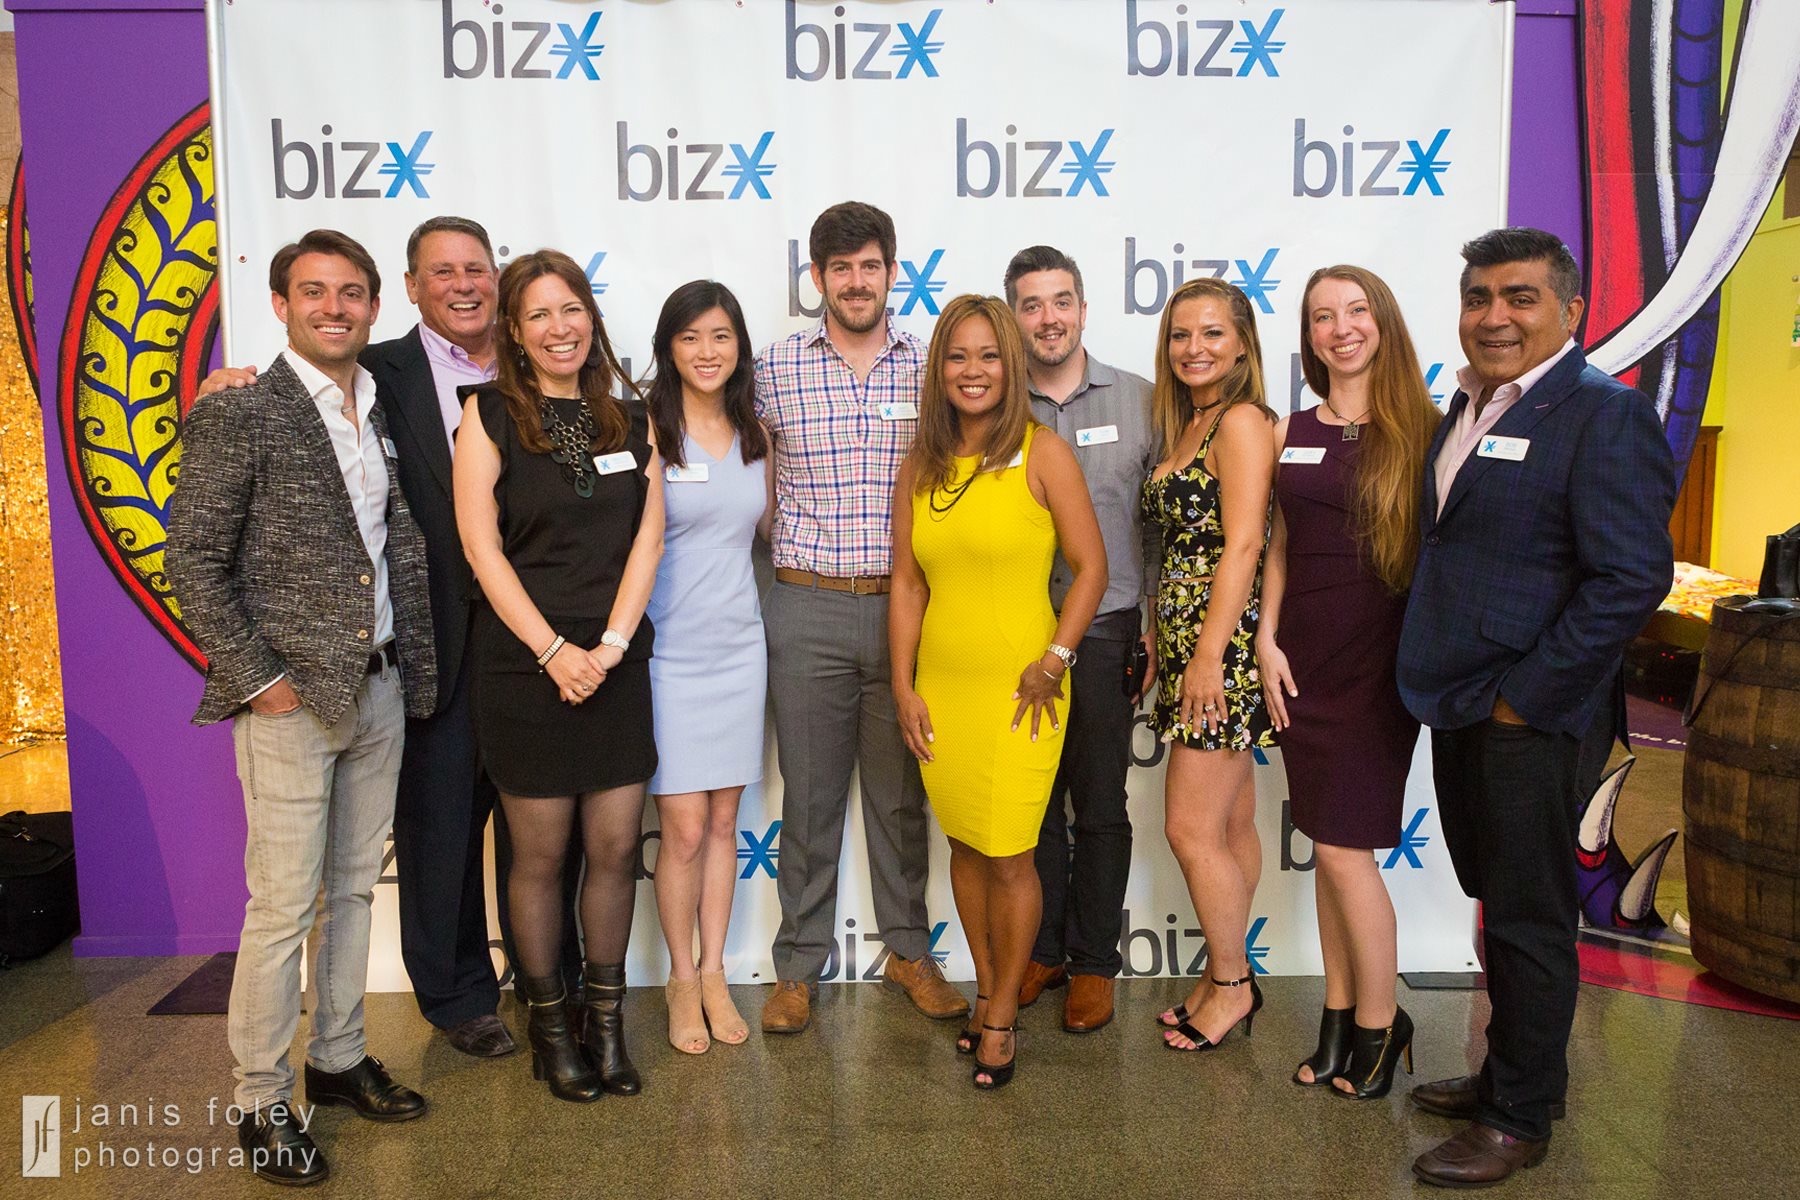 Members of the BizX San Diego, San Francisco, and Seattle teams gather for the San Diego community launch event.